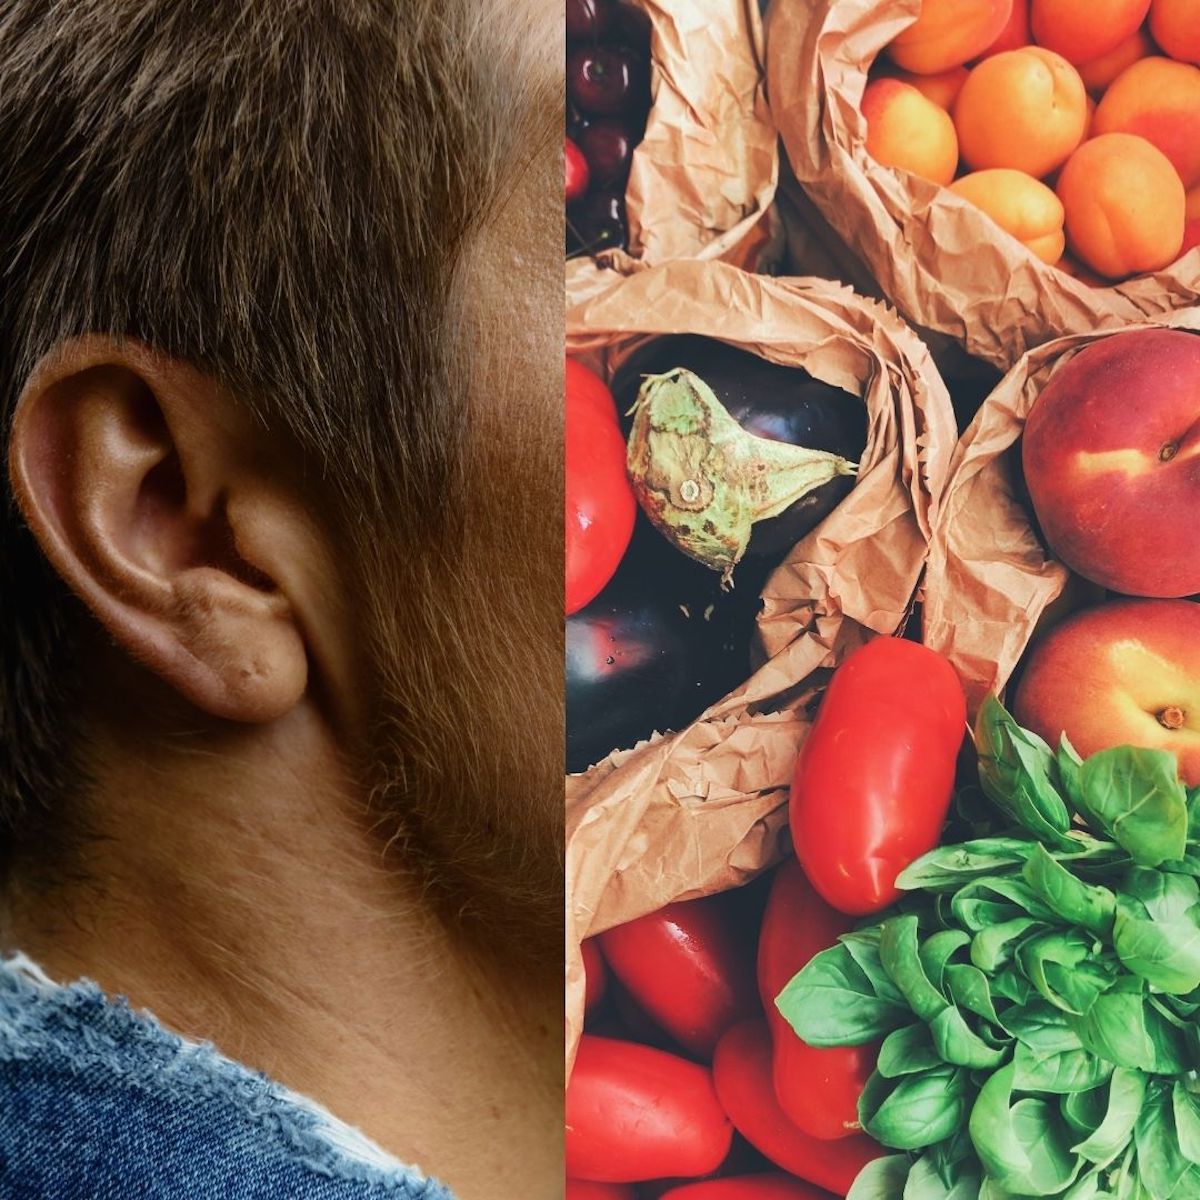 Split photo. Left half white male ear. Right half colorful foods including oranges, grape tomatoes, and spinach